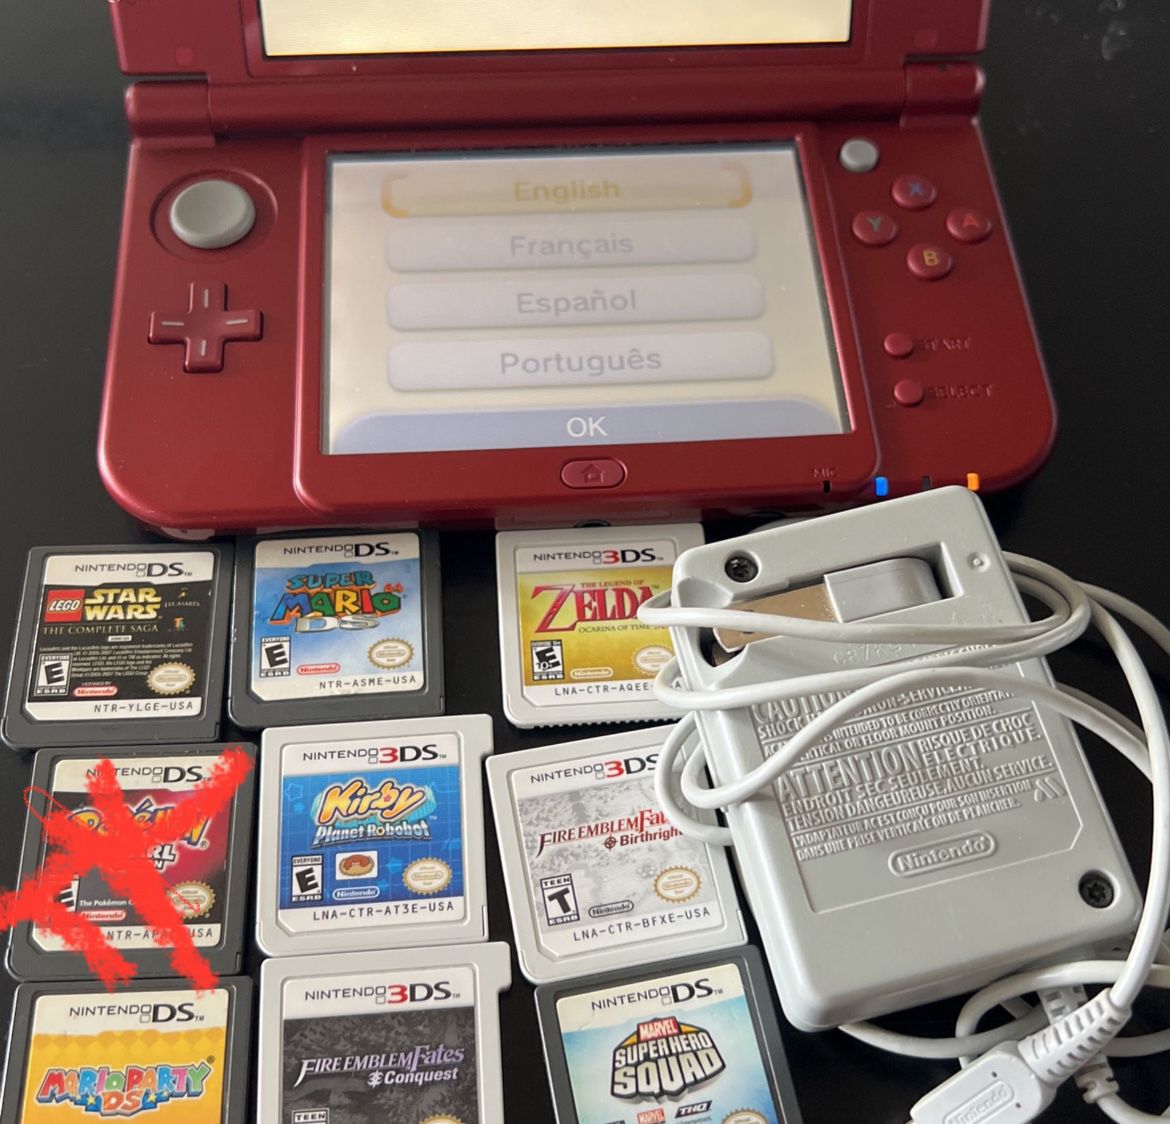 2019 Version The New Nintendo 3DS XL With Case, Charger, 8 Games, Stylus, Big WiiU Case Included